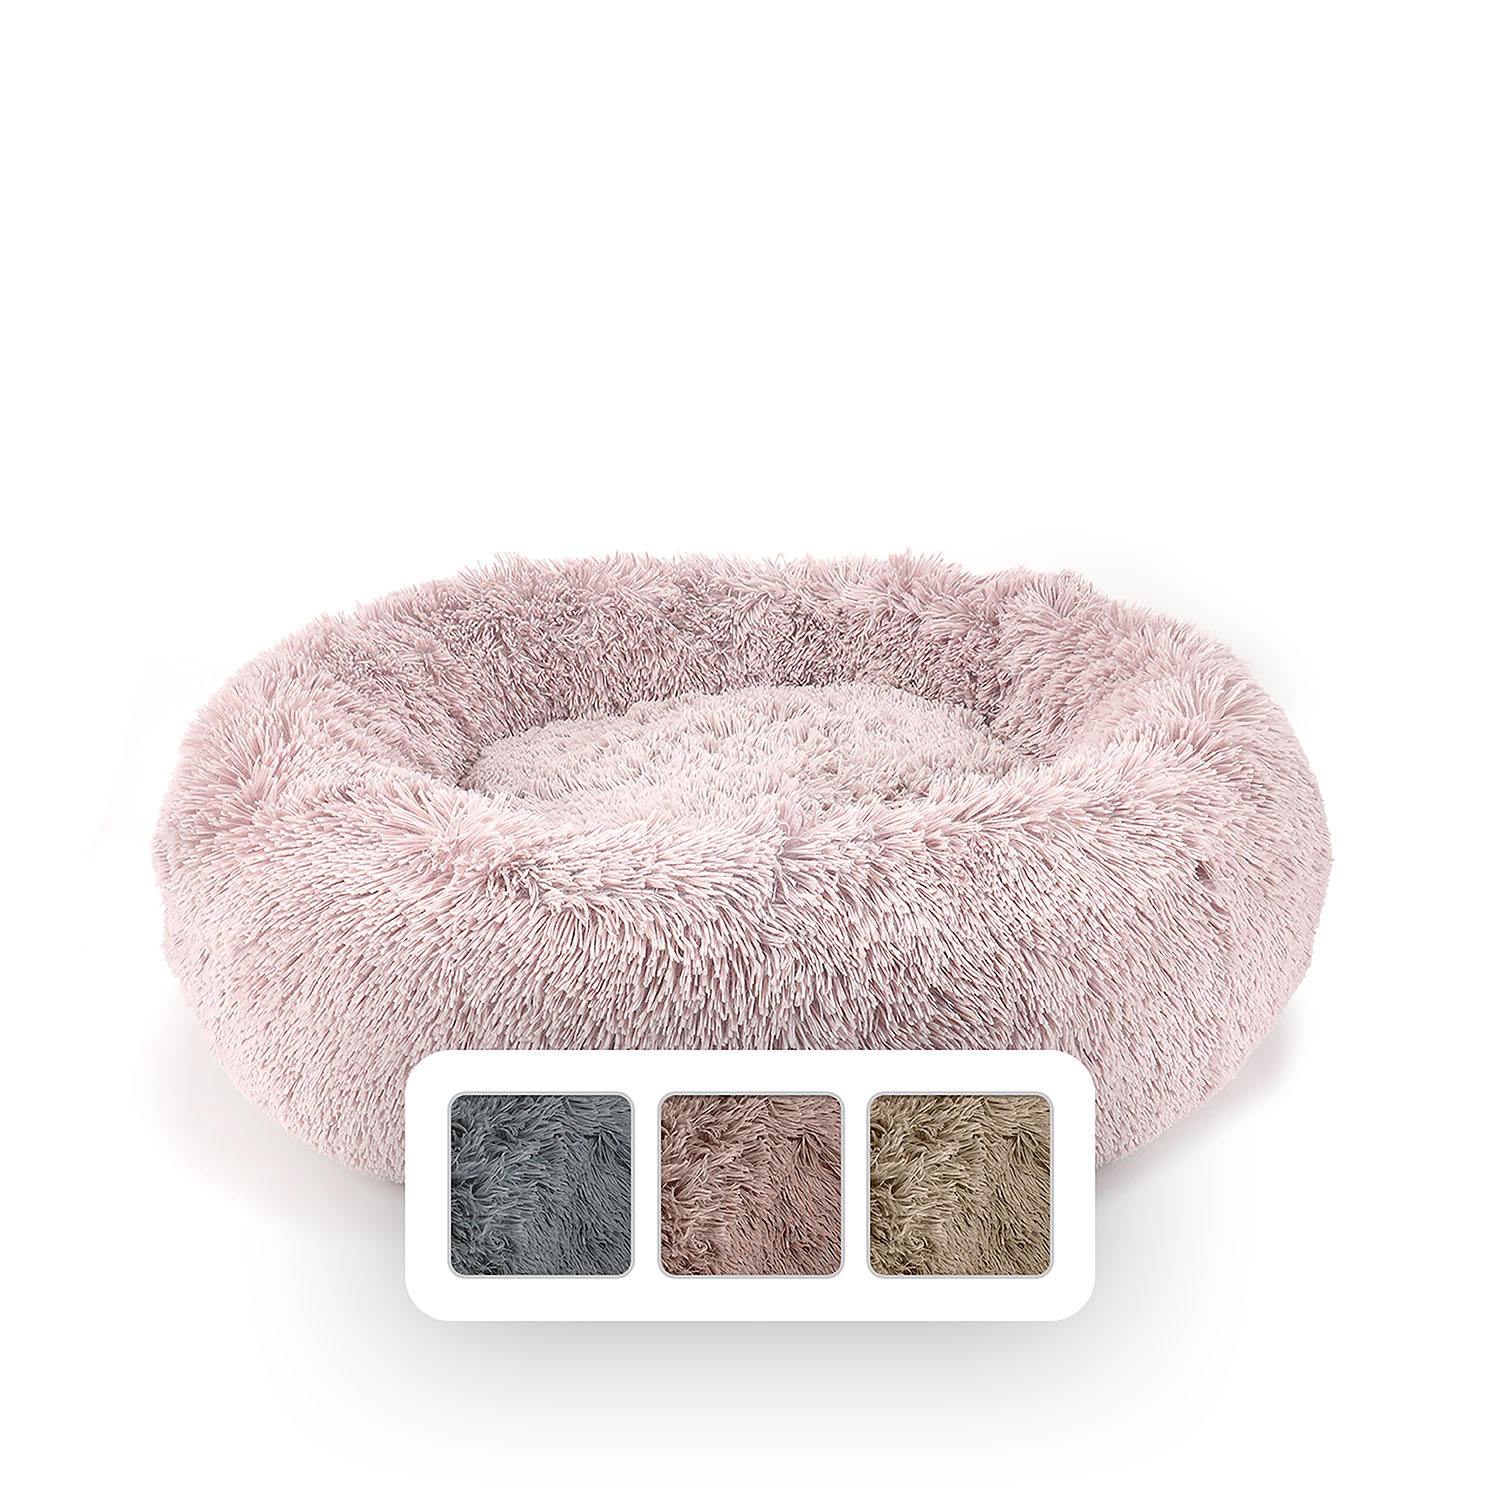 Canine Creations Donut Round Pet Bed, 28' x 28' - Blush